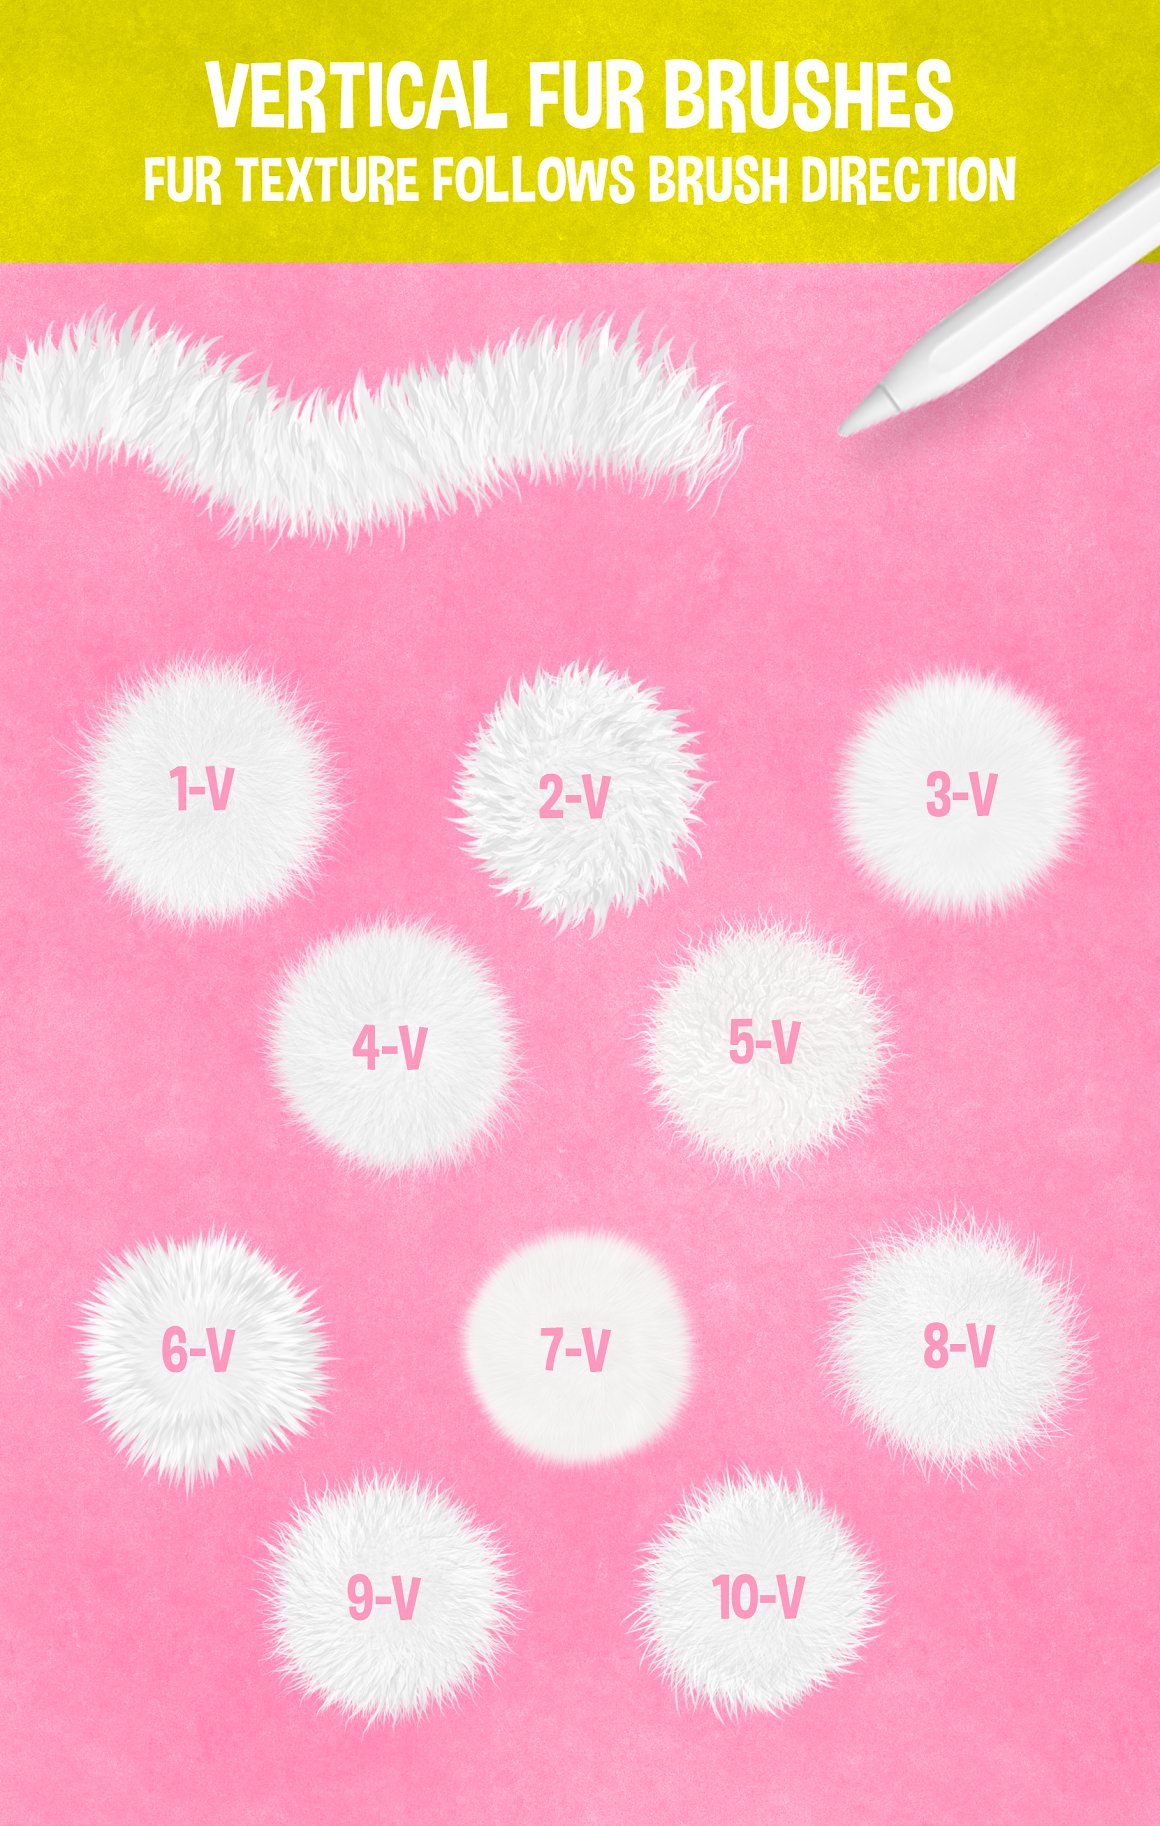 A set of 10-V white fur brushes on a pink background.